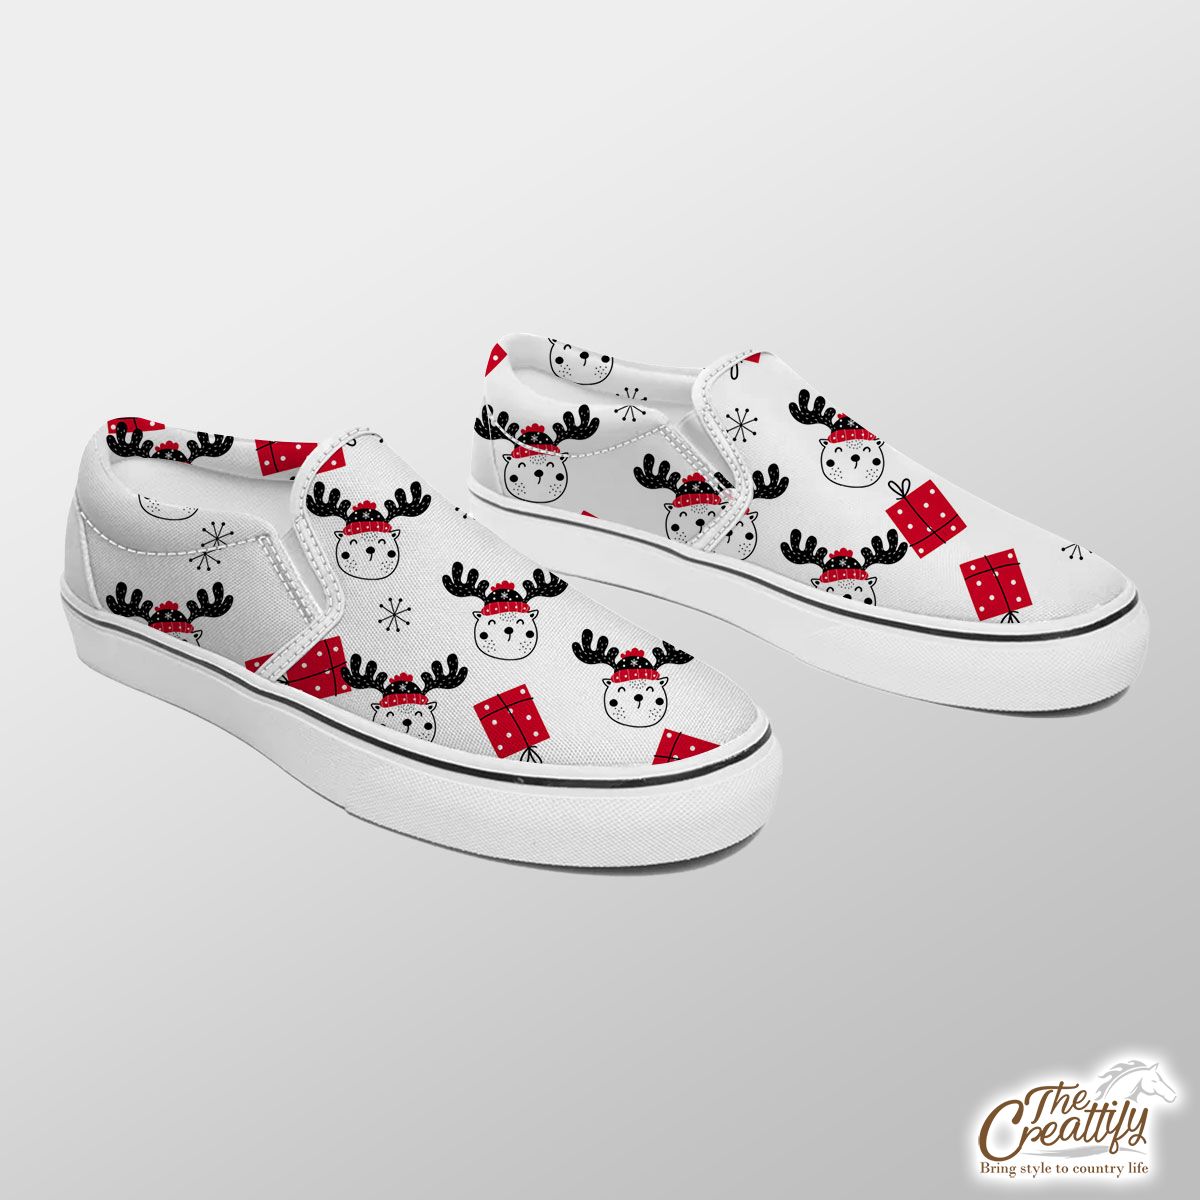 Hand Drawn Christmas Gifts, Reindeer Clipart And Snowflake Clipart Seamless White Pattern Slip On Sneakers